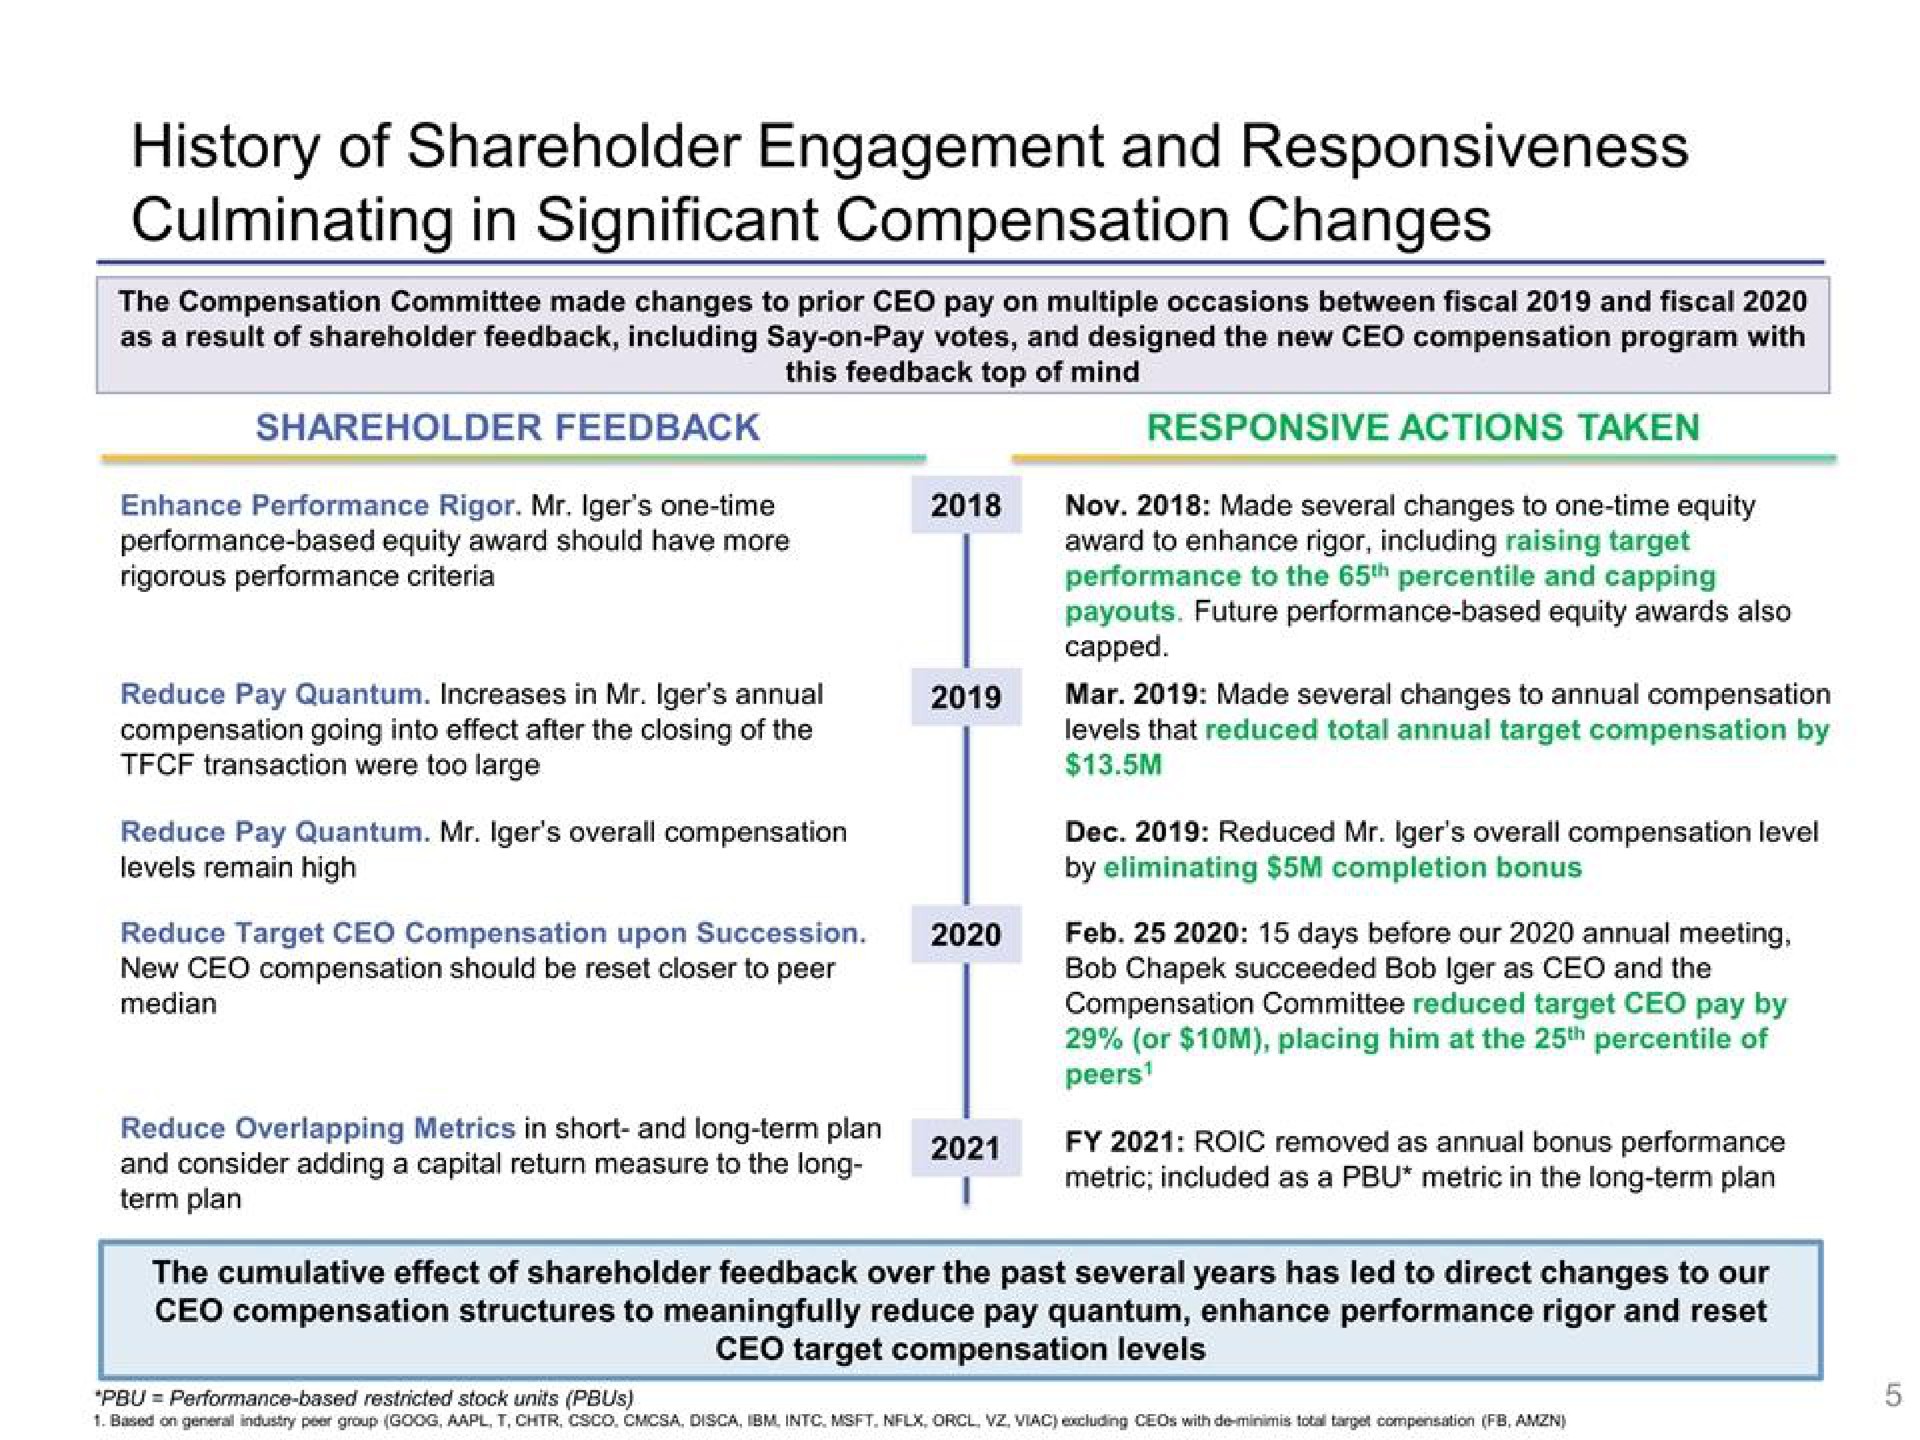 history of shareholder engagement and responsiveness culminating in significant compensation changes | Disney